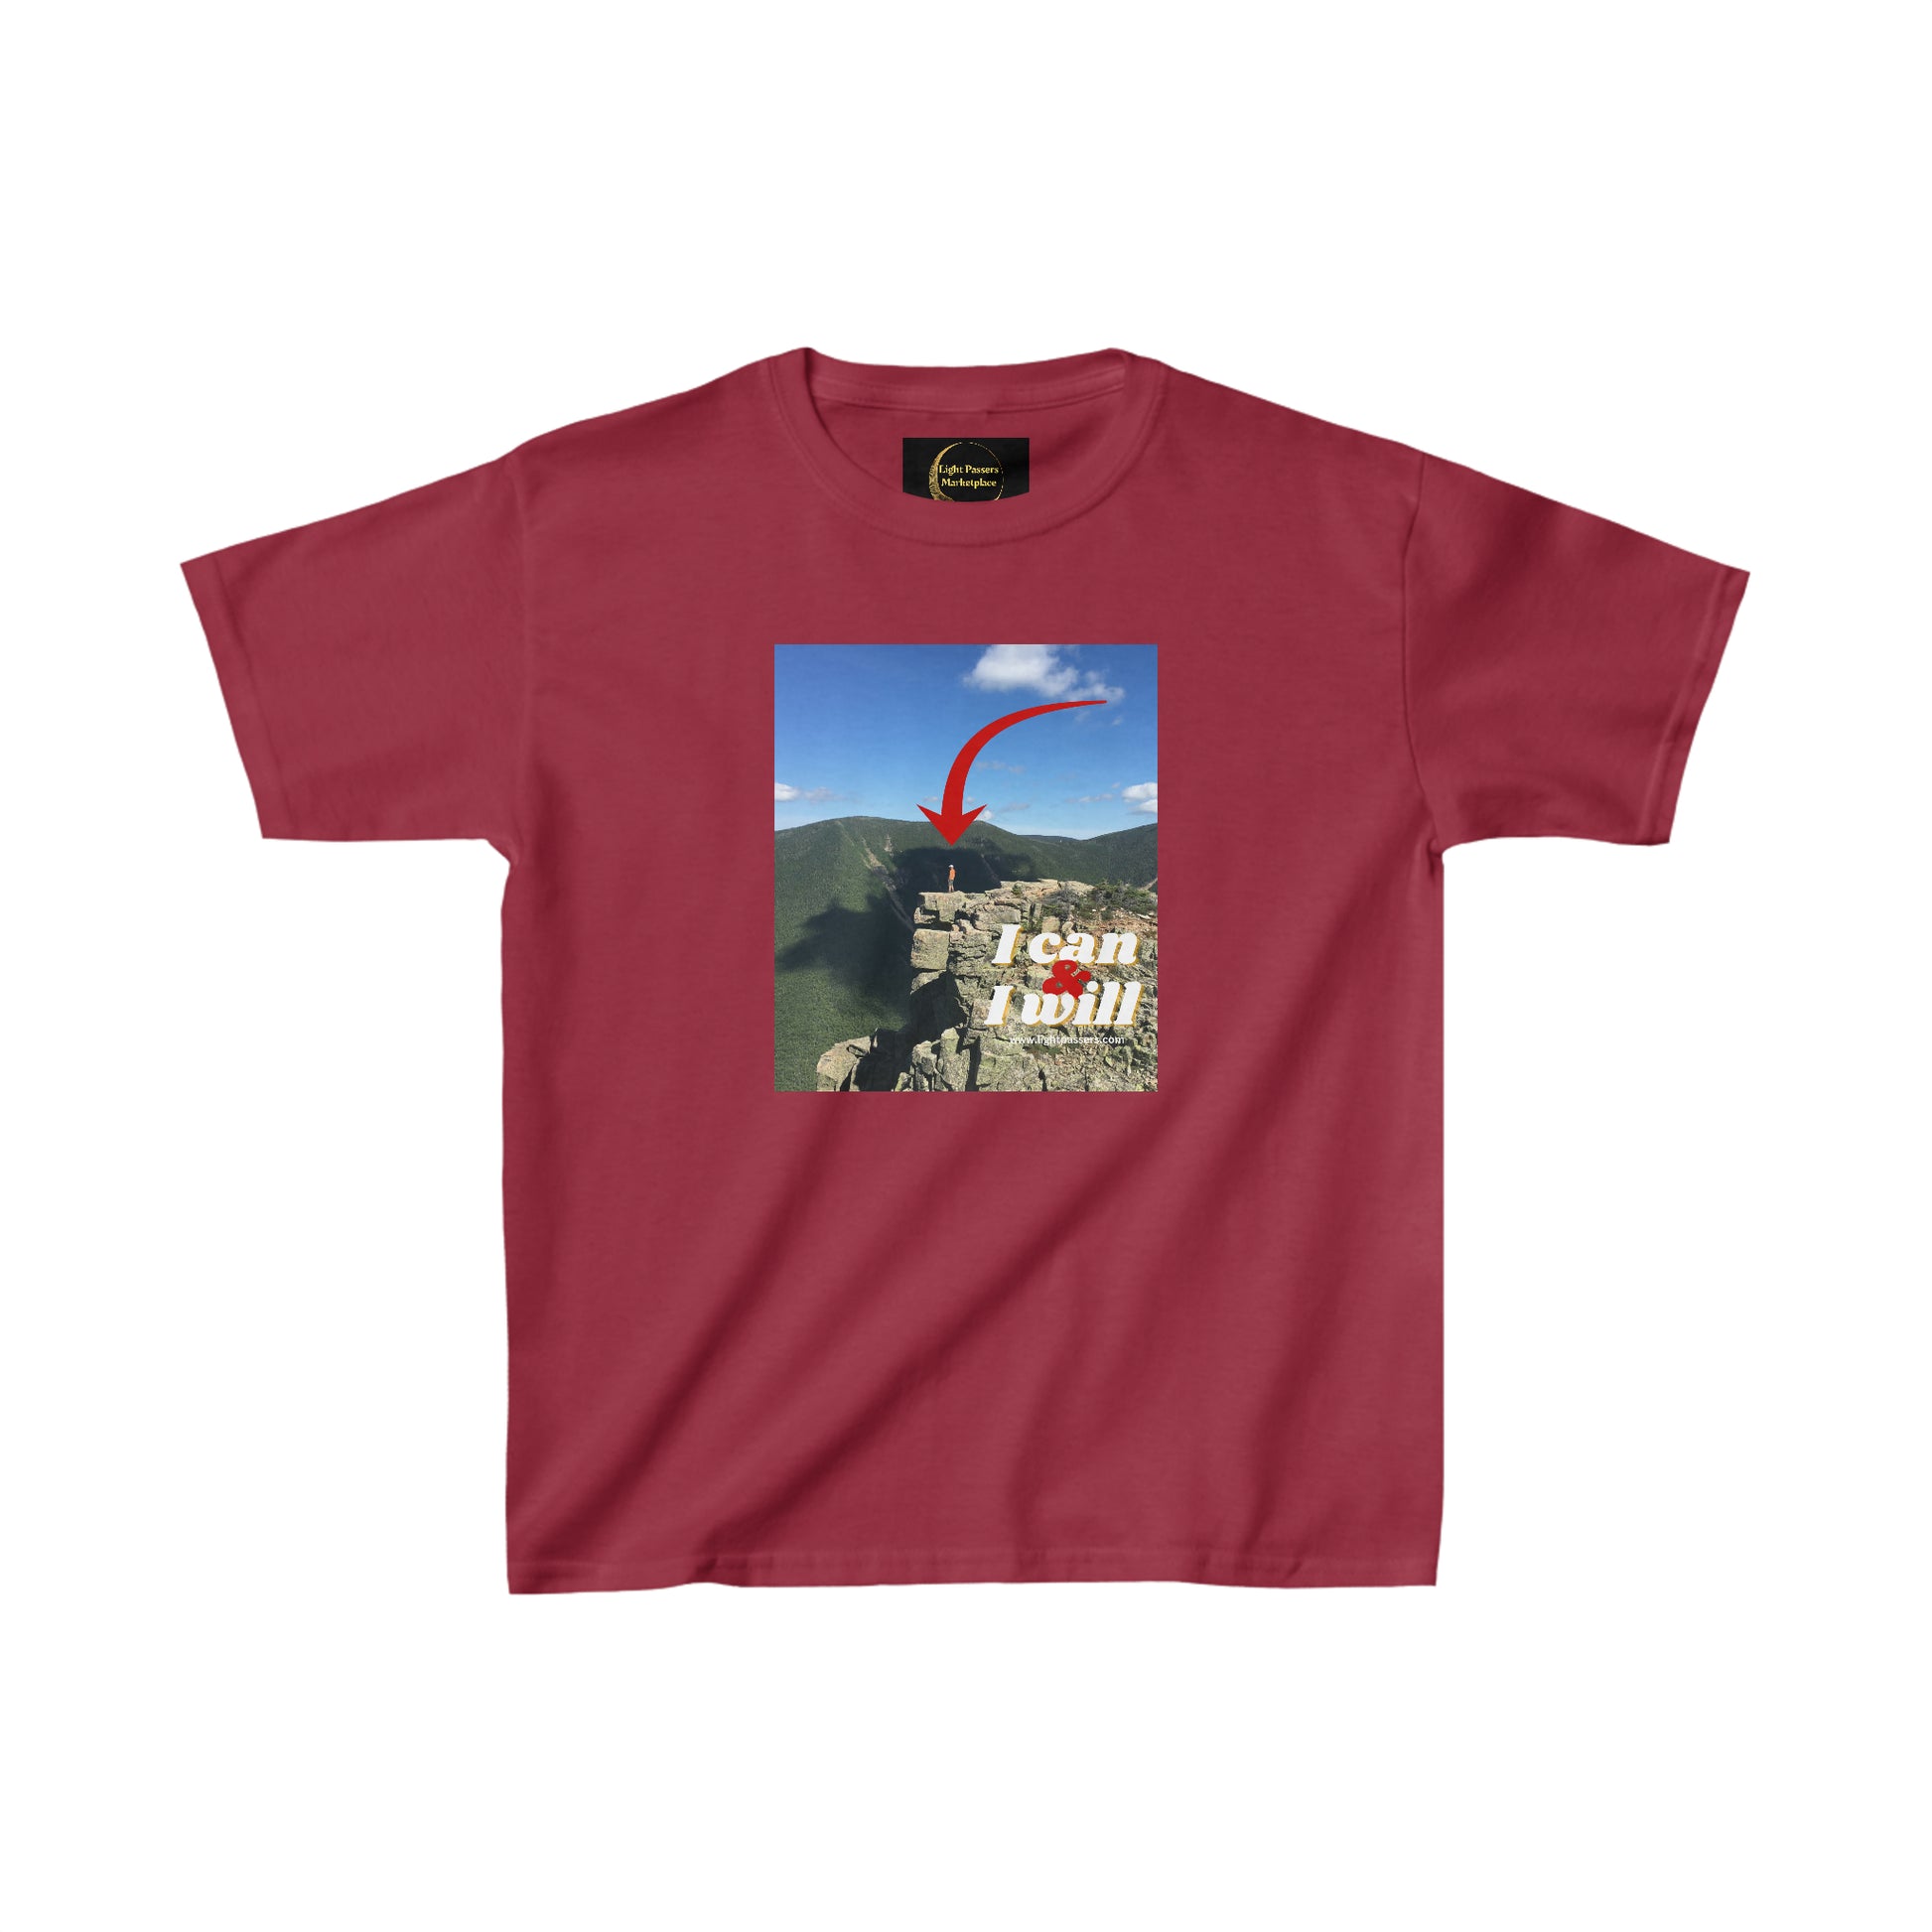 Youth red hiking t-shirt featuring a mountain and sky graphic. Made of 100% cotton with twill tape shoulders for durability and curl-resistant collar. Ethically sourced US cotton.